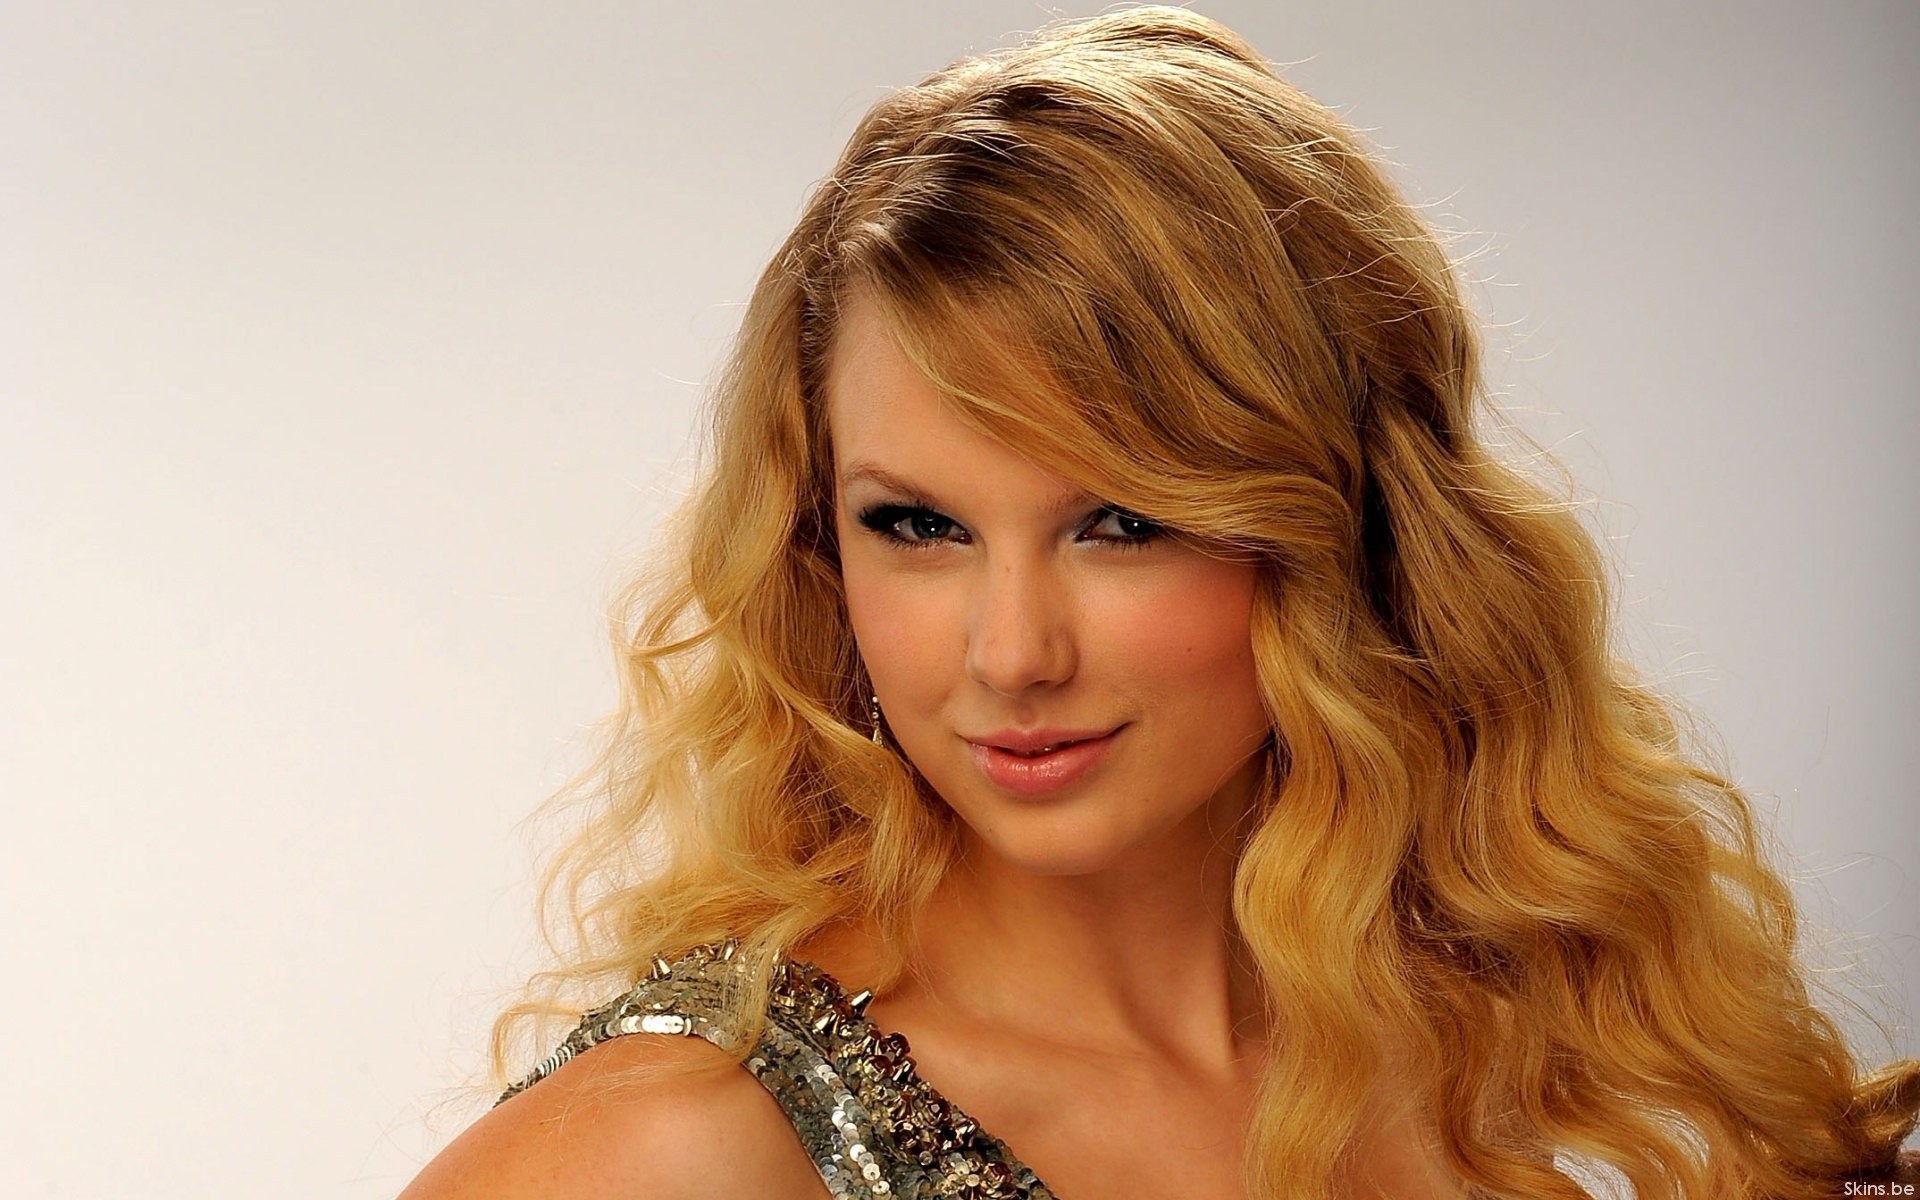 So Here S Geous Taylor Swift Wallpaper To Adorn Your Desktop